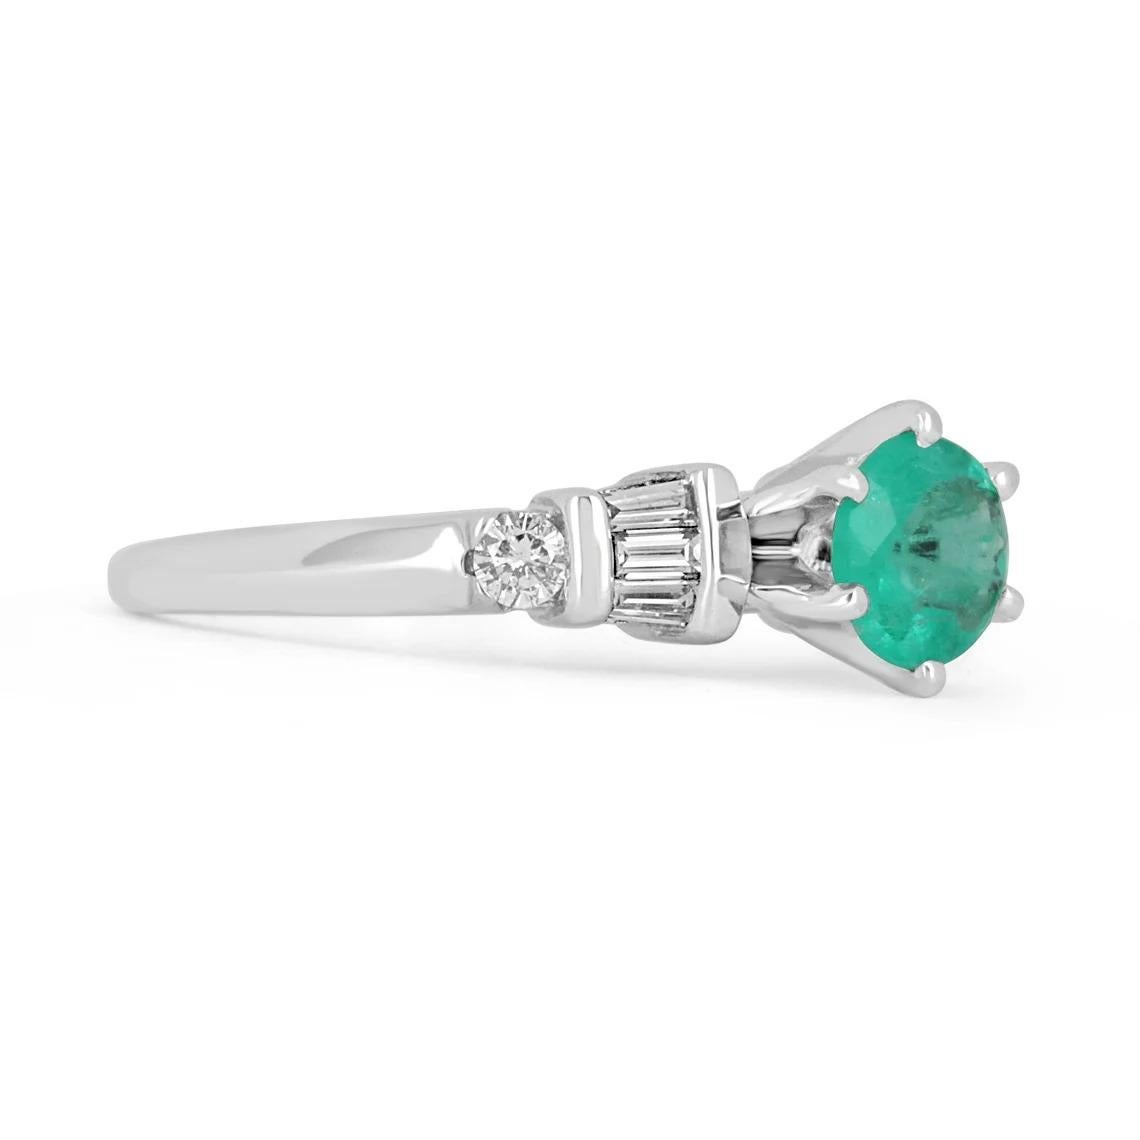 Displayed is a stunning emerald and diamond ring. The center gemstone is a round-cut emerald handset in a six-prong setting that allows for a full view of the emerald. Tapered baguette and brilliant round diamonds are tension set on the shank of the